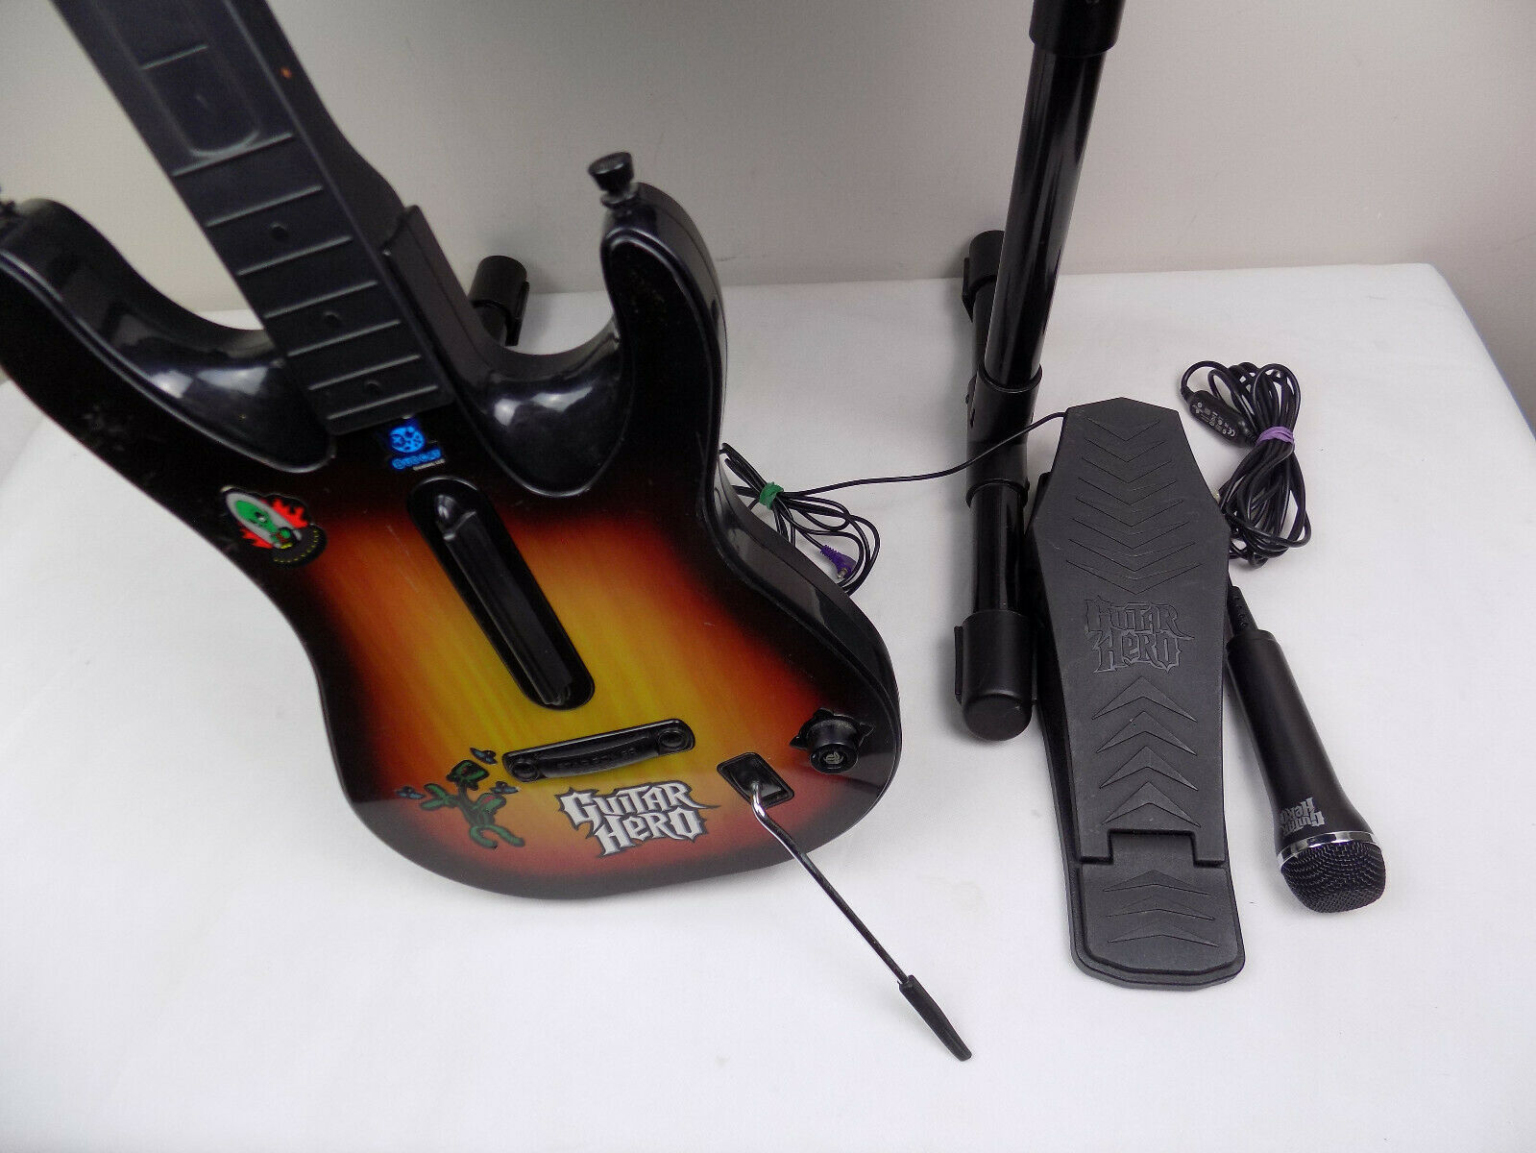 download free ps5 rock band